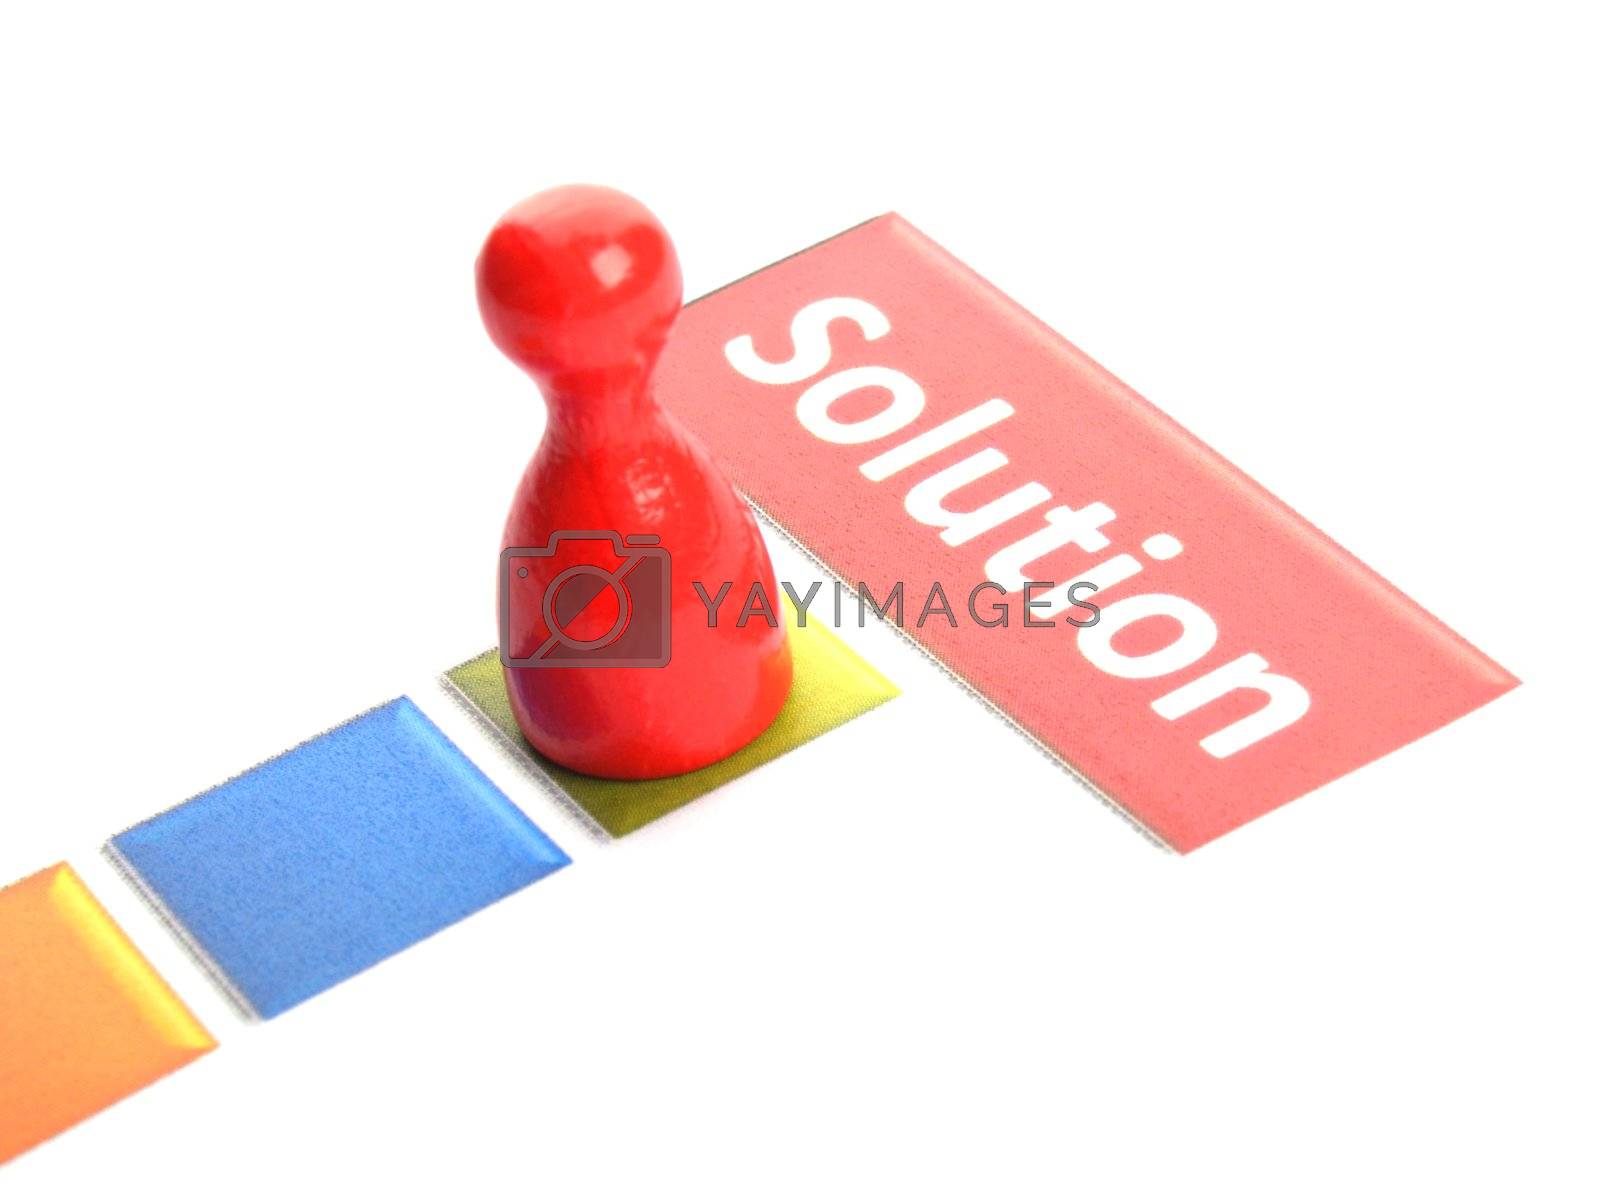 Royalty free image of solution by gunnar3000